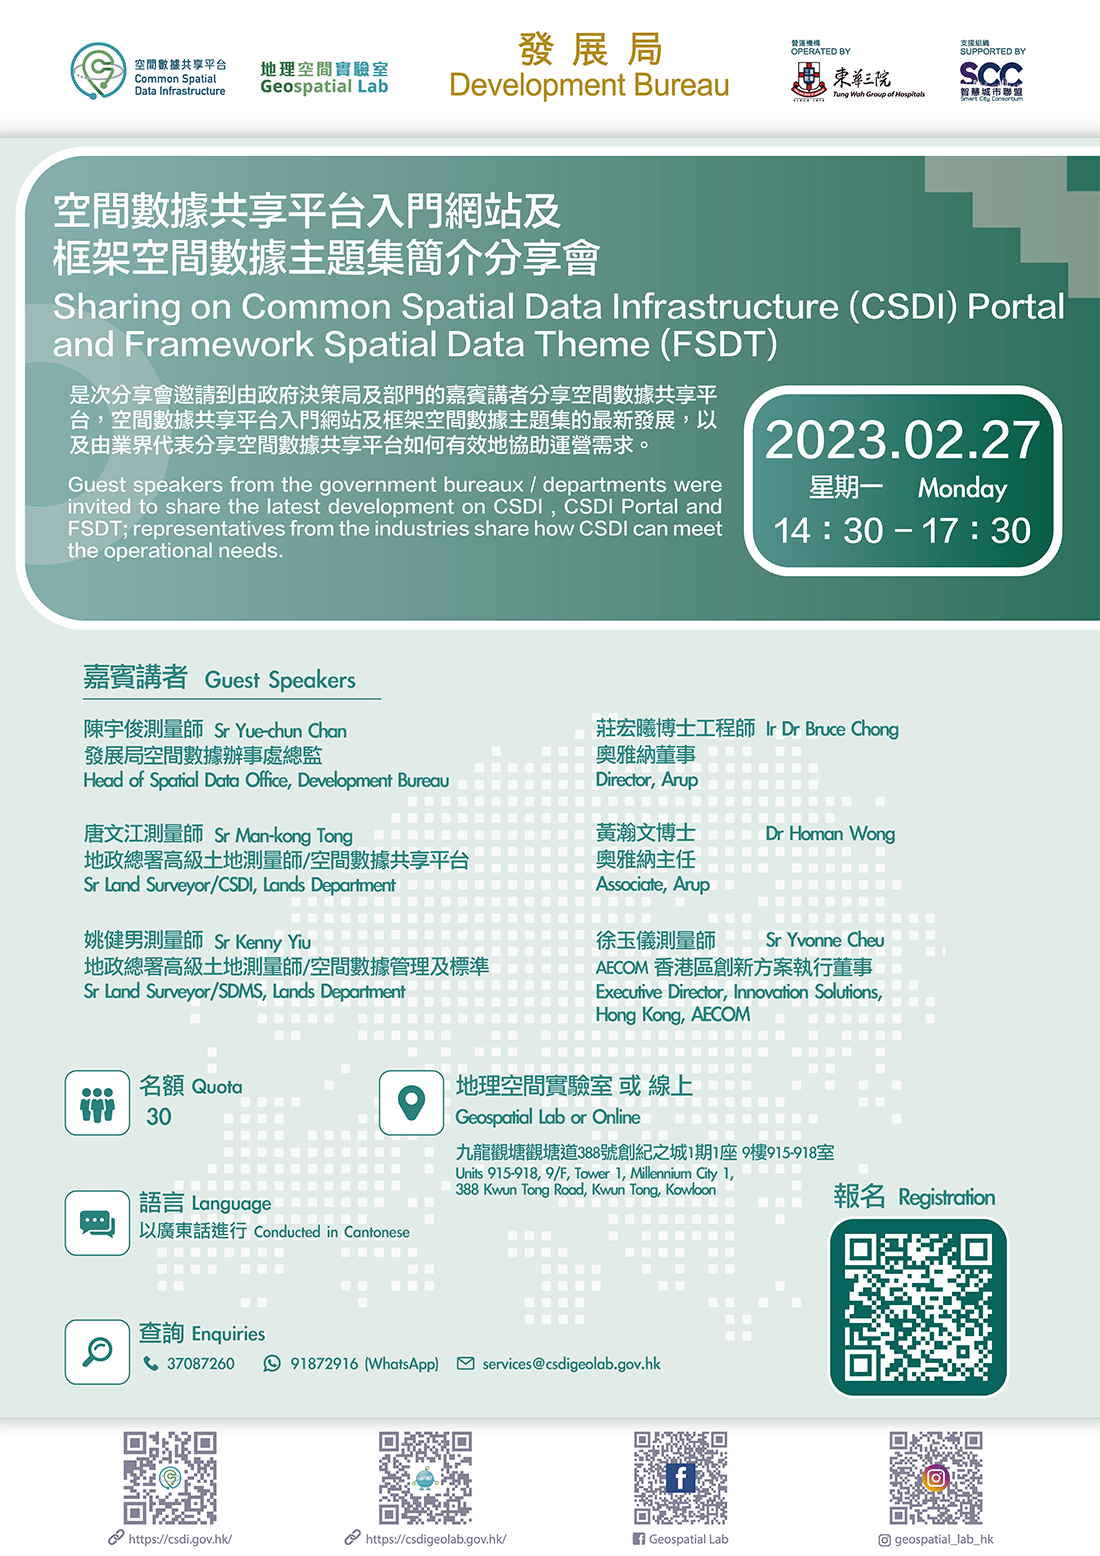 Poster of Sharing on CSDI Portal and Framework Spatial Data Theme